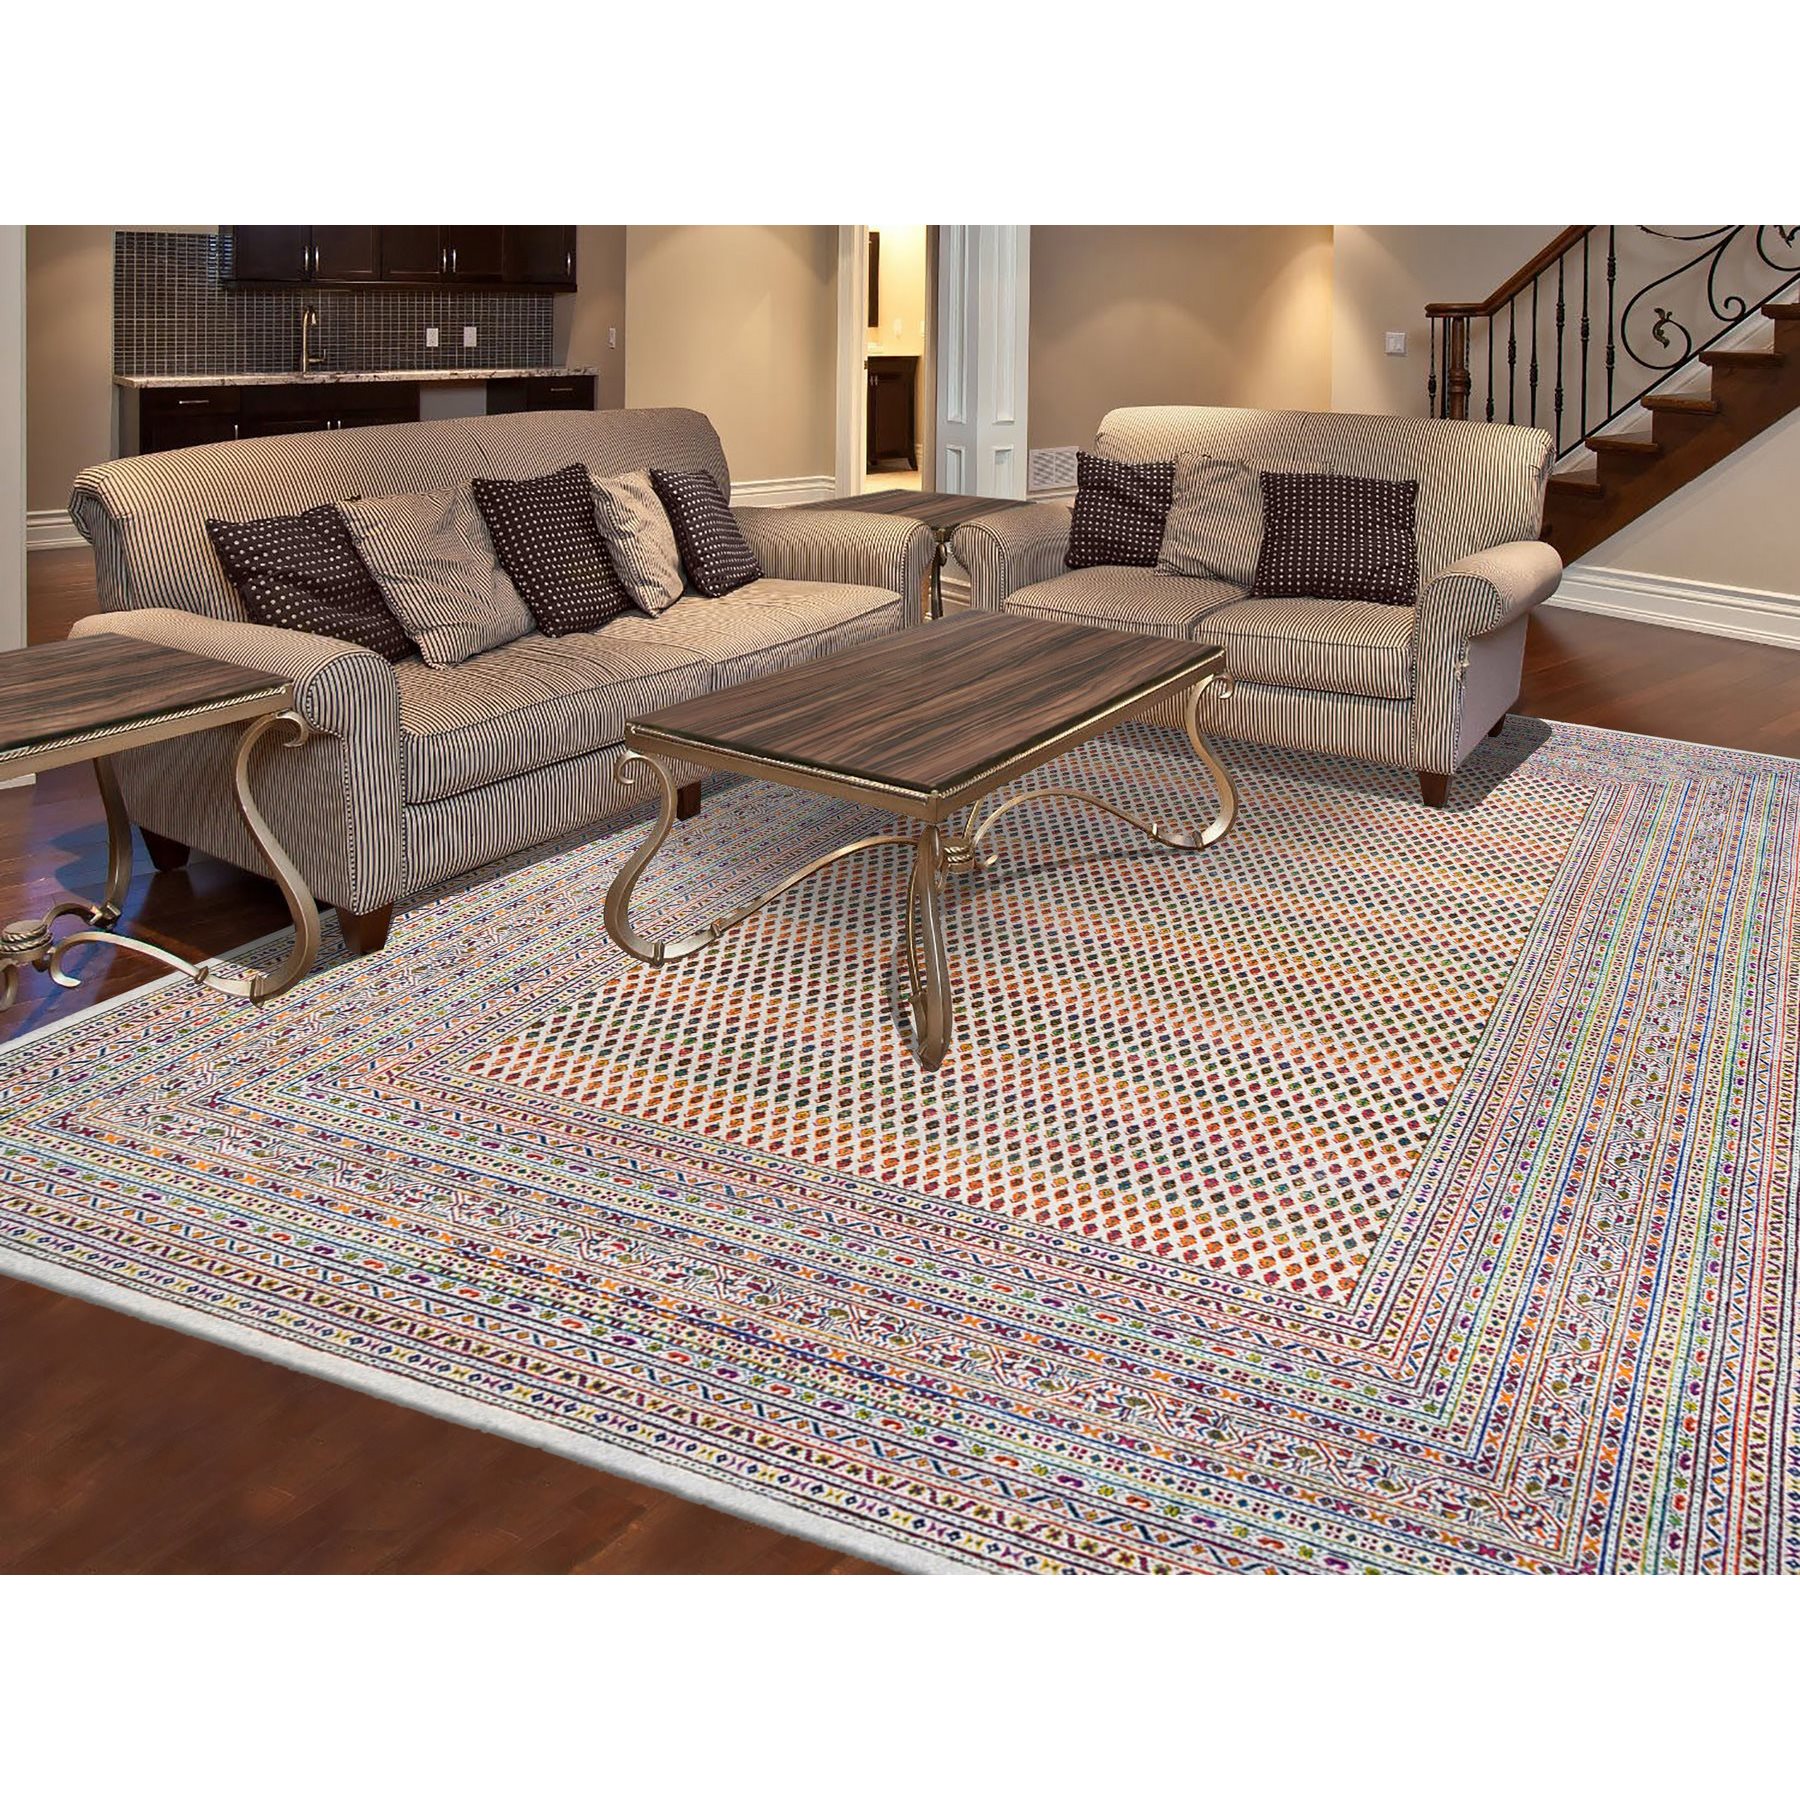 9'10"x14' Colorful Wool And Sari Silk Sarouk Mir Inspired With Repetitive Boteh Design Hand Woven Oriental Rug 